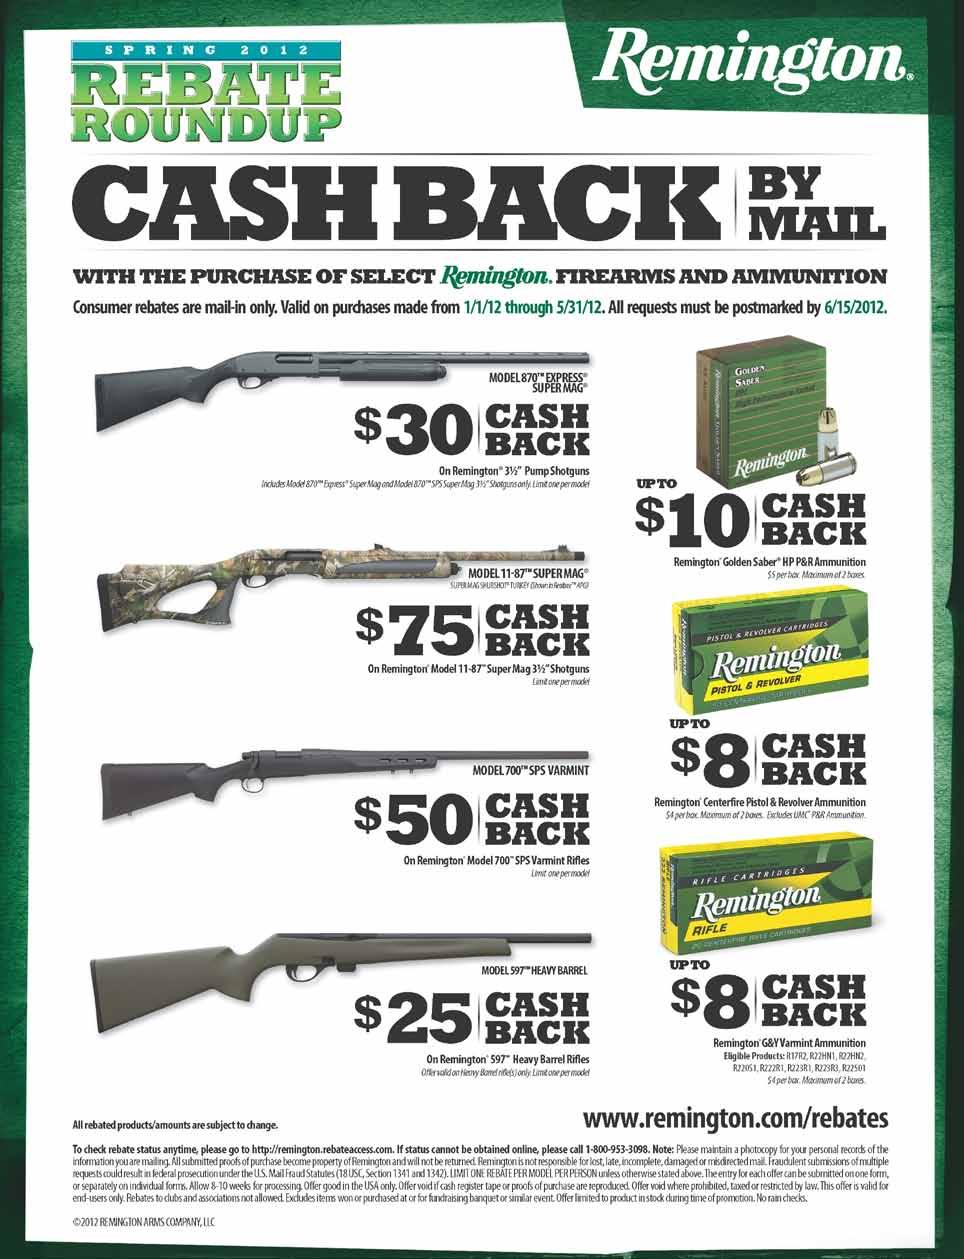 MORE Consumer Promotions at or Call Your Davidson s Account Executive Today For All the Programs Available for Your Customers www.davidsonsinc.